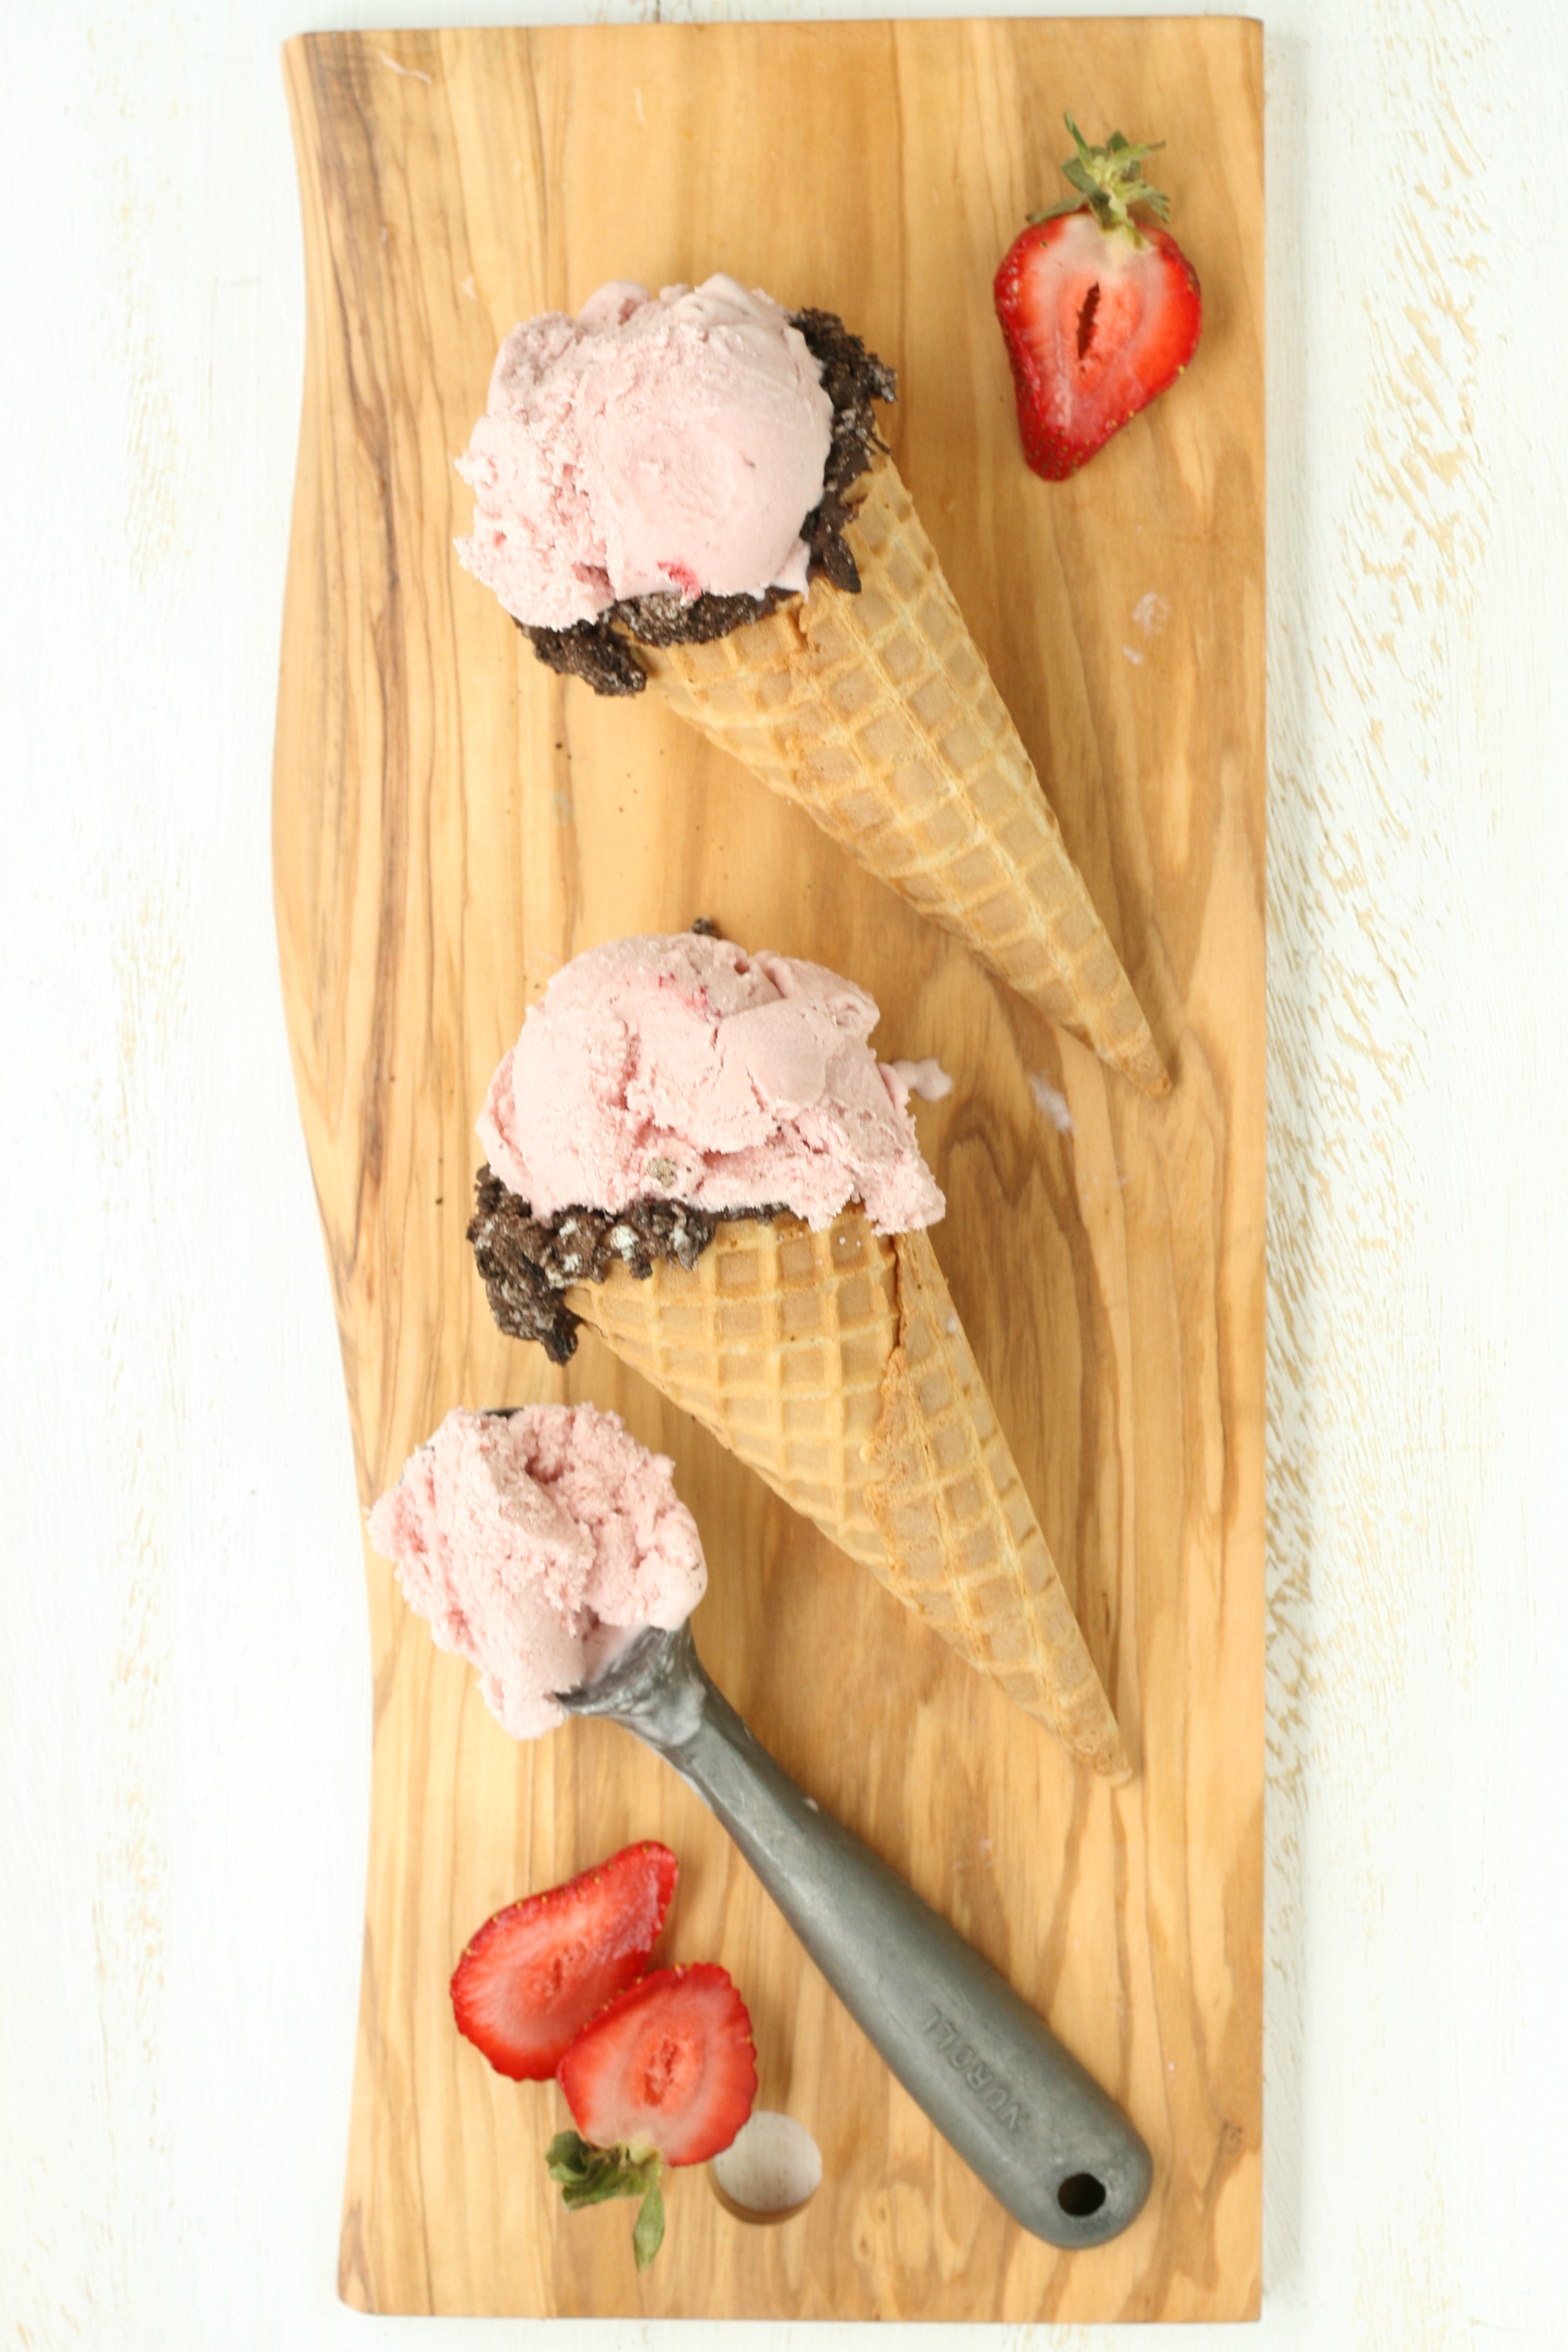 Homemade strawberry ice cream in waffle cones sitting on a wooden cutting board with a vintage ice cream scoop.